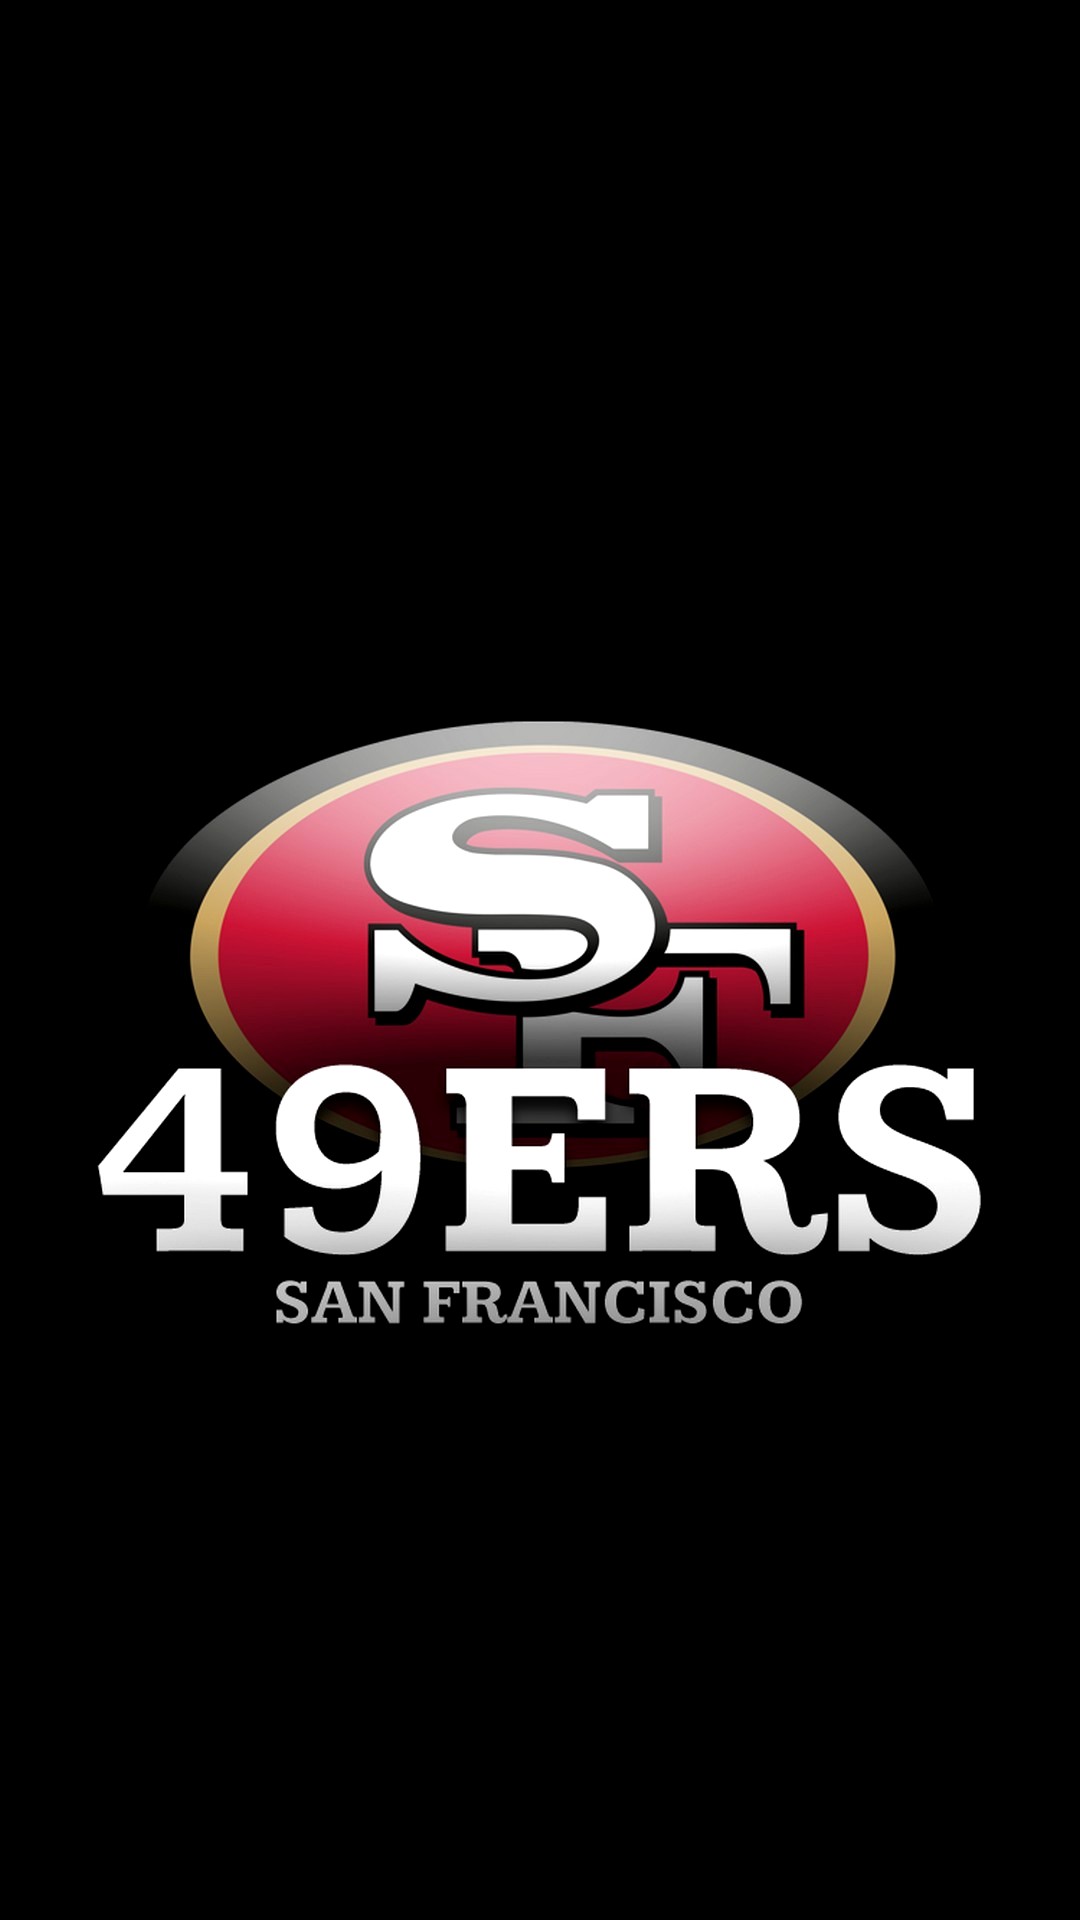 Wallpaper 49ers iPhone With high-resolution 1080X1920 pixel. You can use this wallpaper for your Mac or Windows Desktop Background, iPhone, Android or Tablet and another Smartphone device